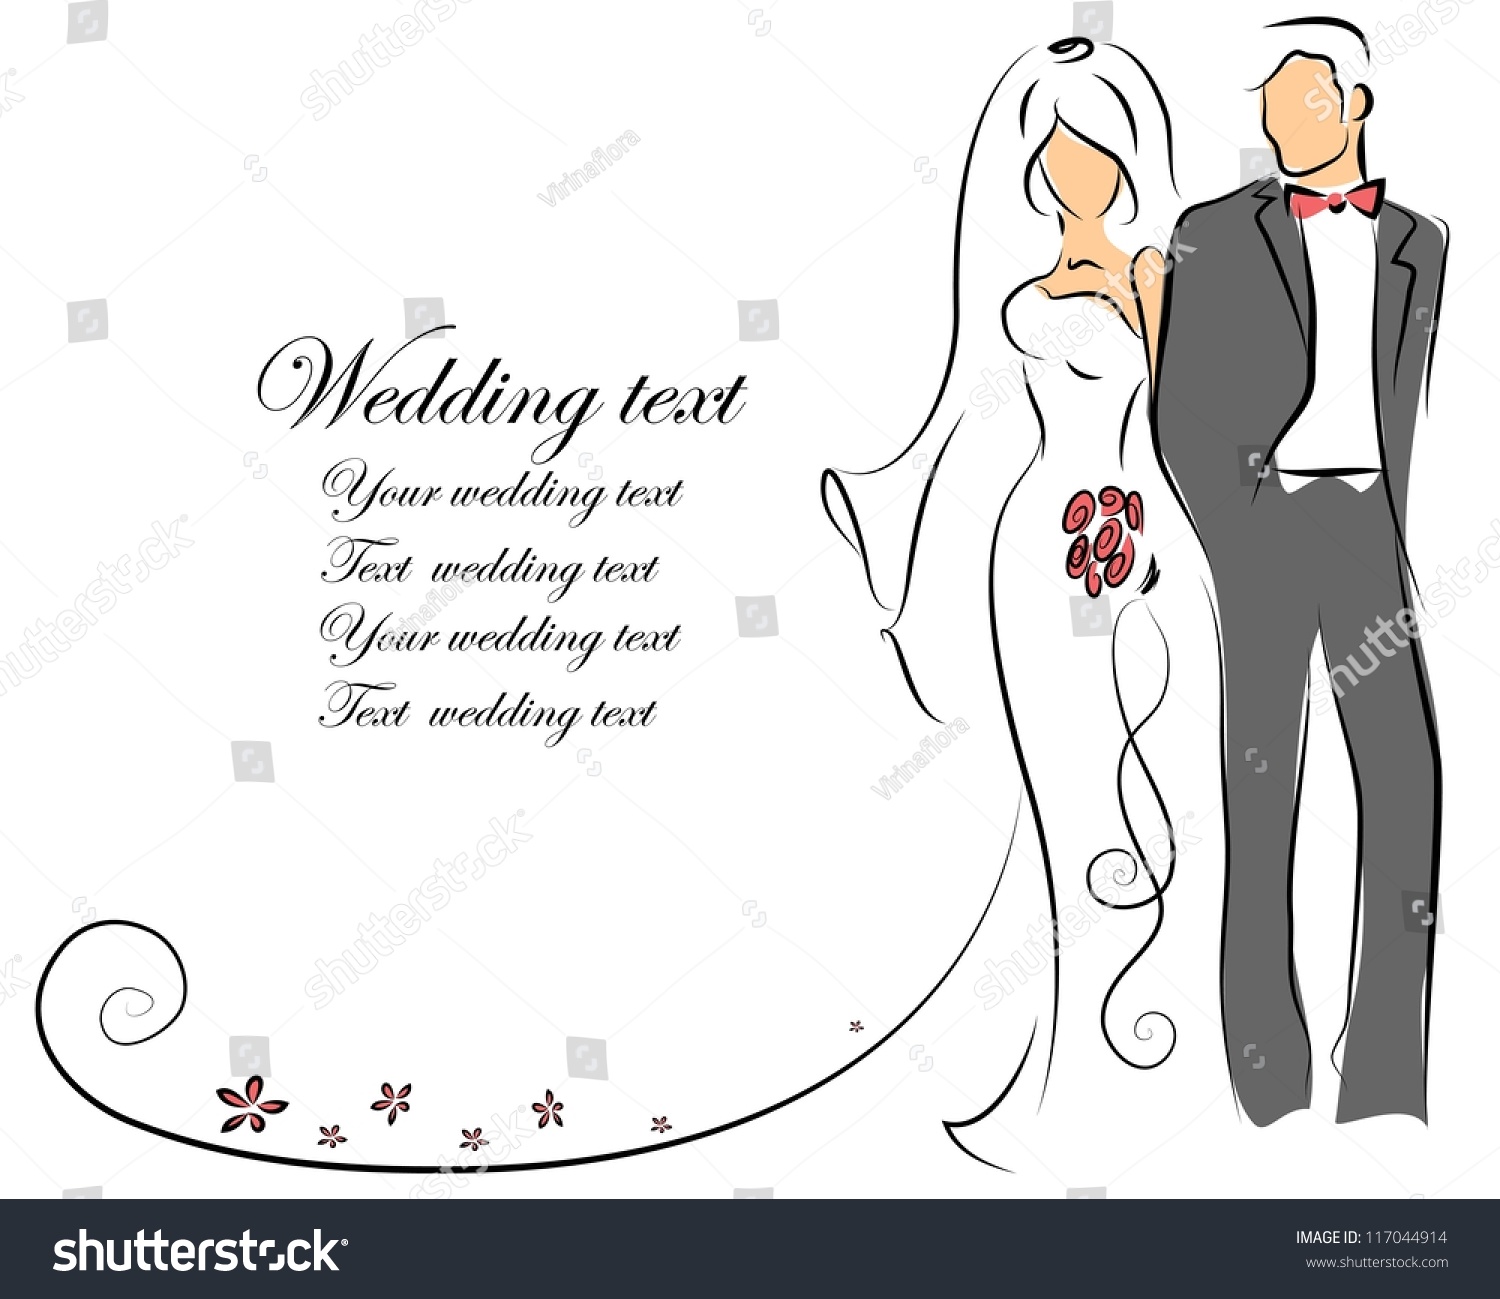 clipart gallery for wedding card - photo #43